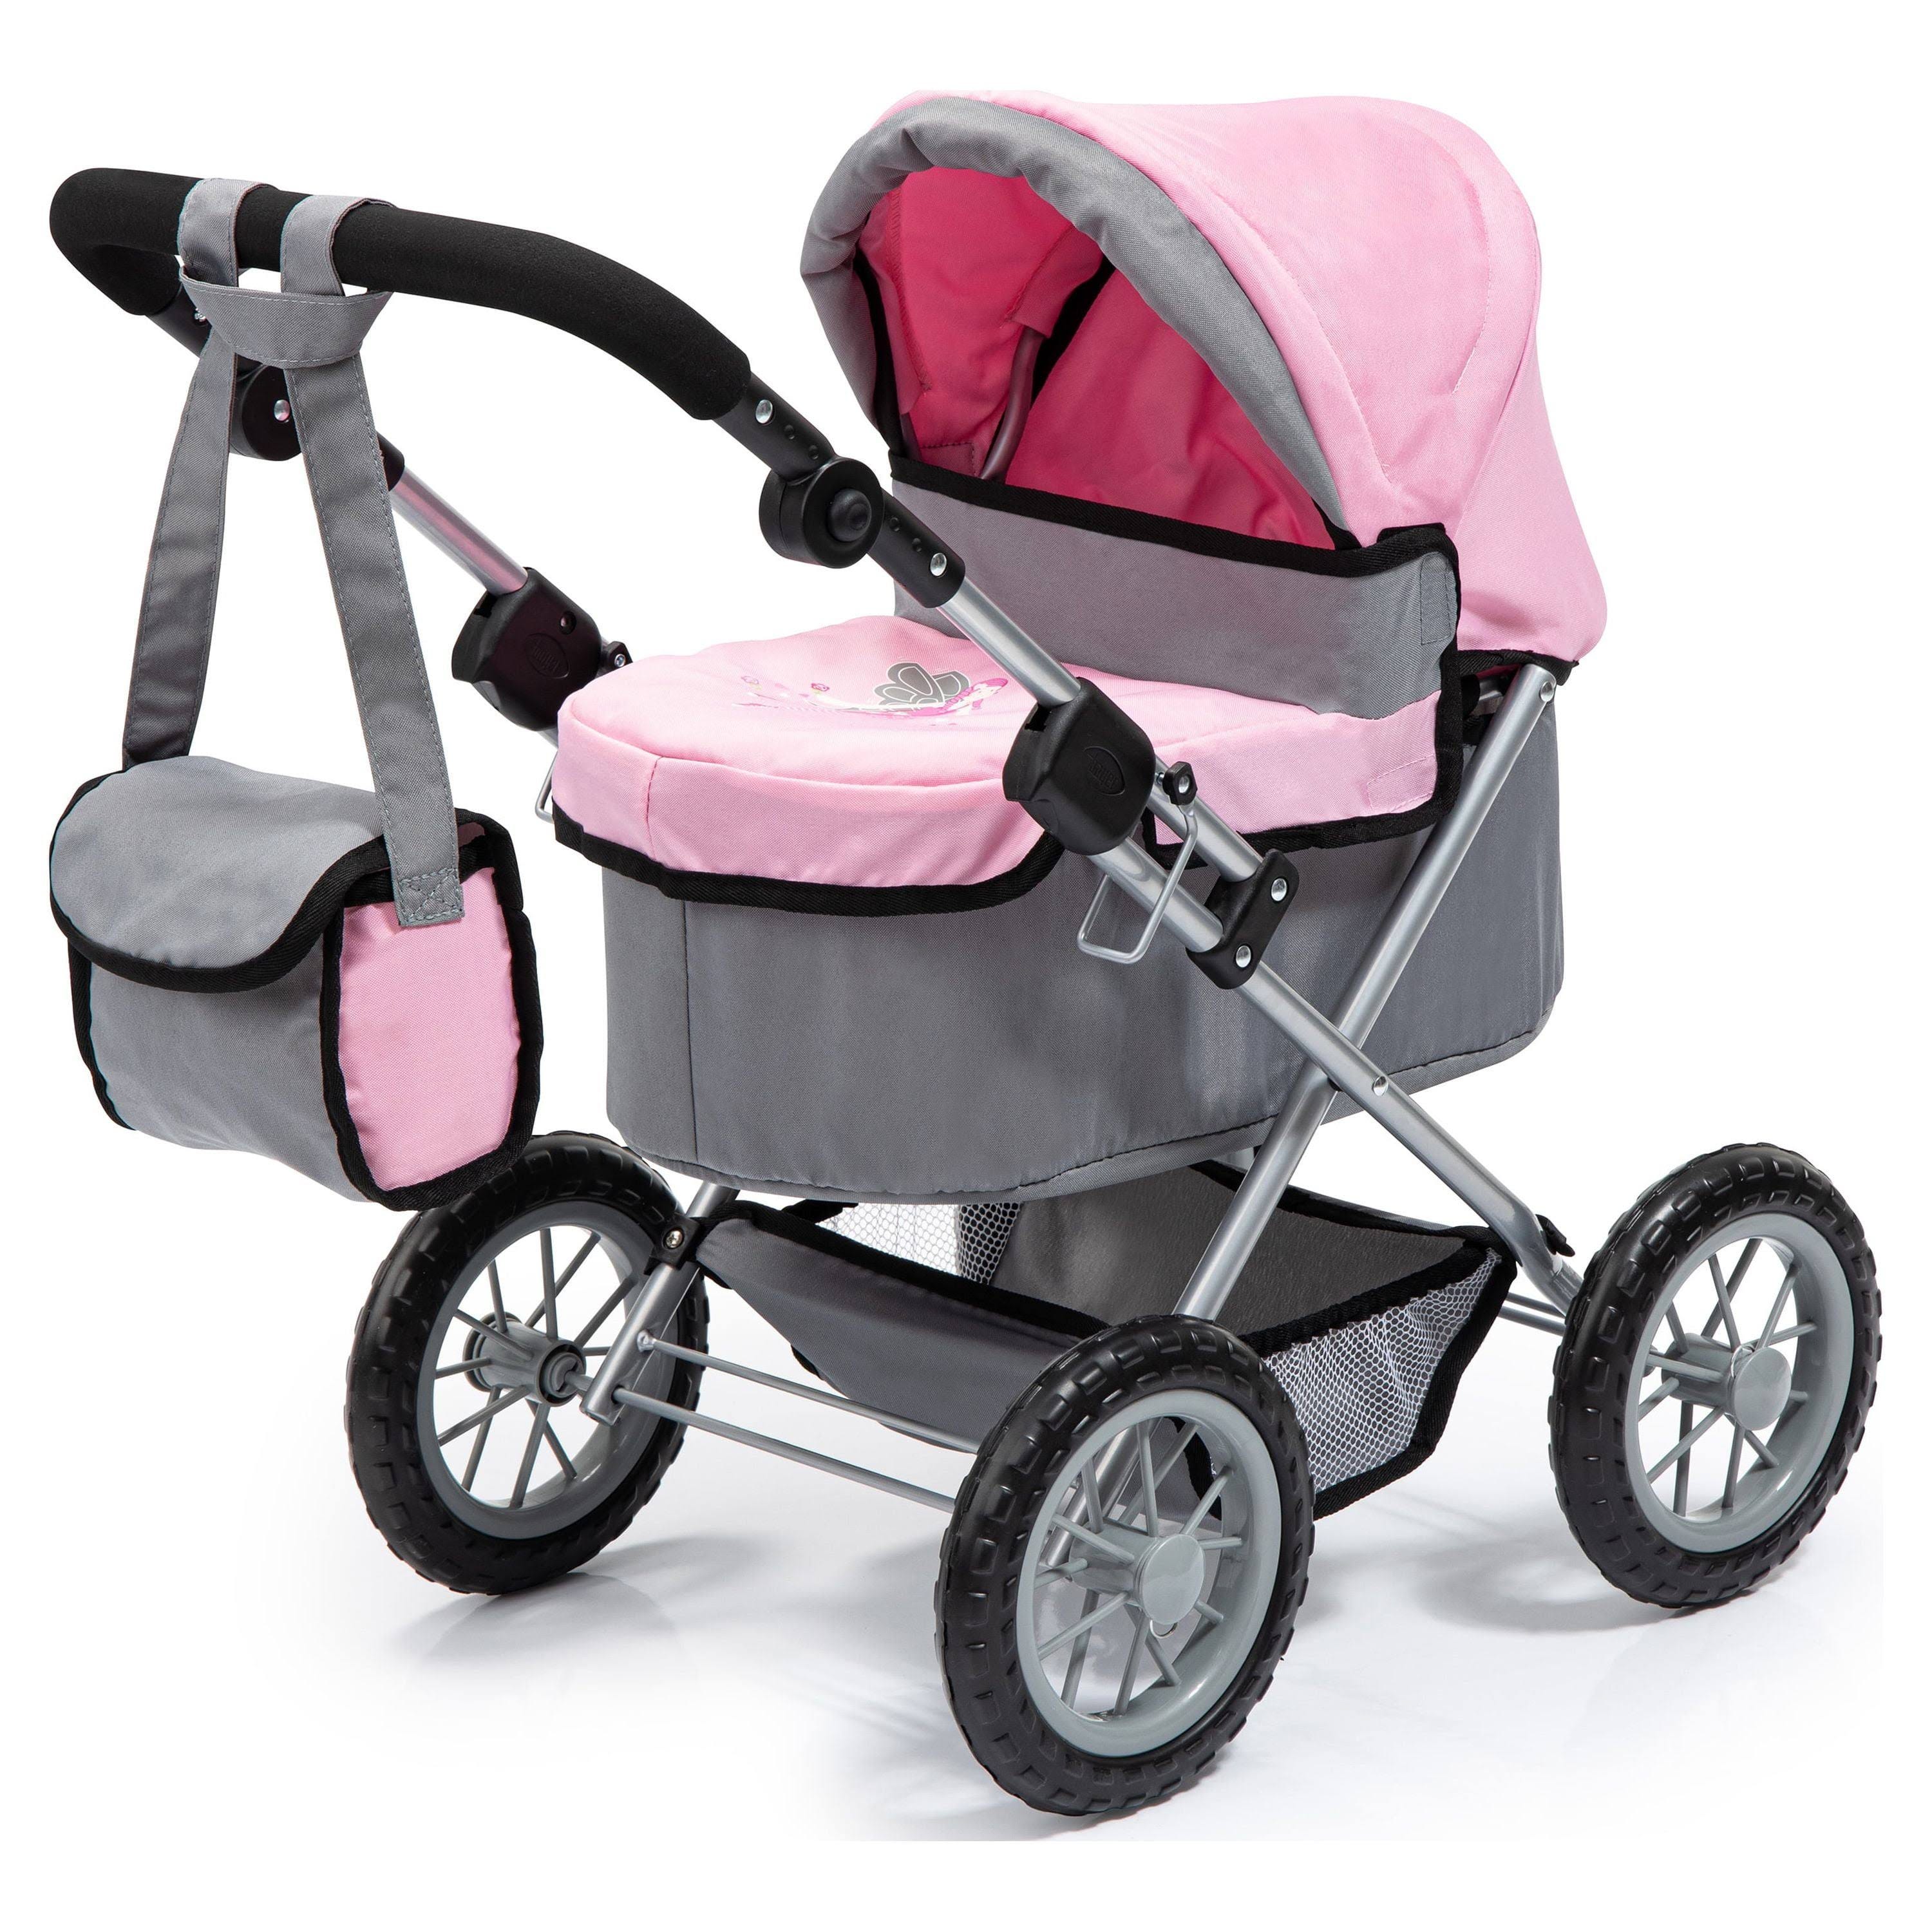 Stylish Grey/Pink Baby Doll Pram Stroller with Foldable Design and Shopping Basket | Image